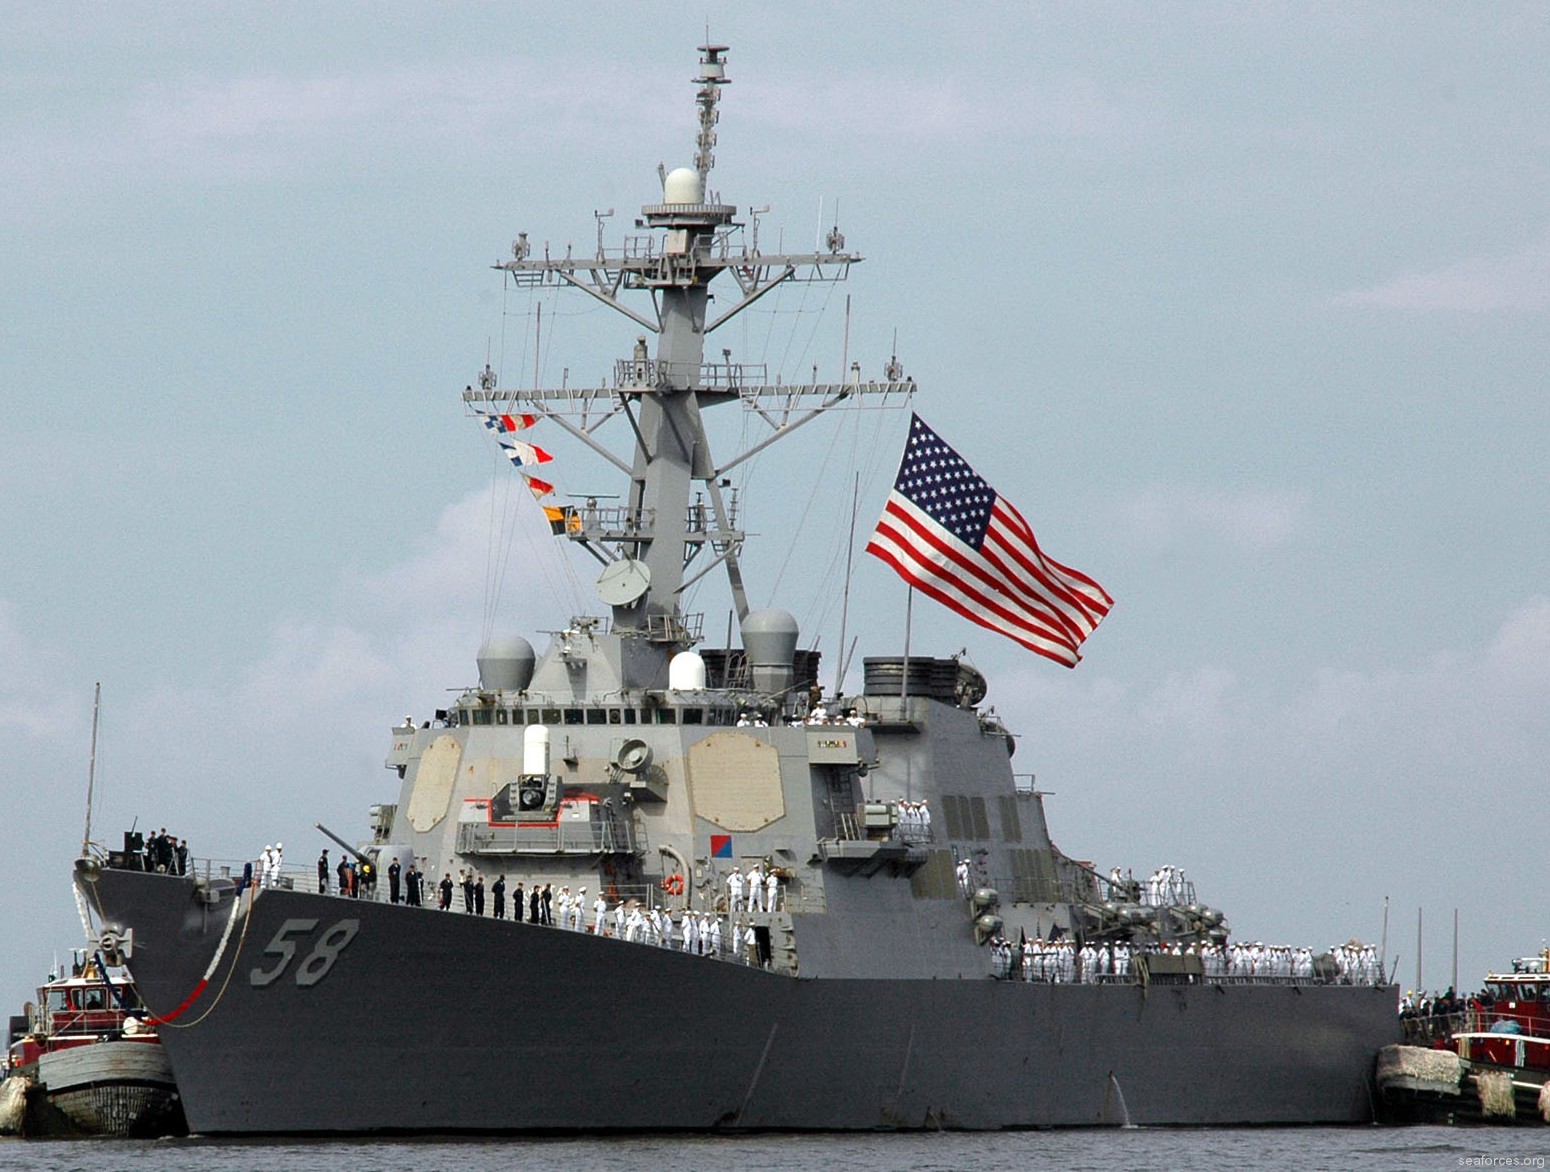 ddg-58 uss laboon guided missile destroyer us navy 64